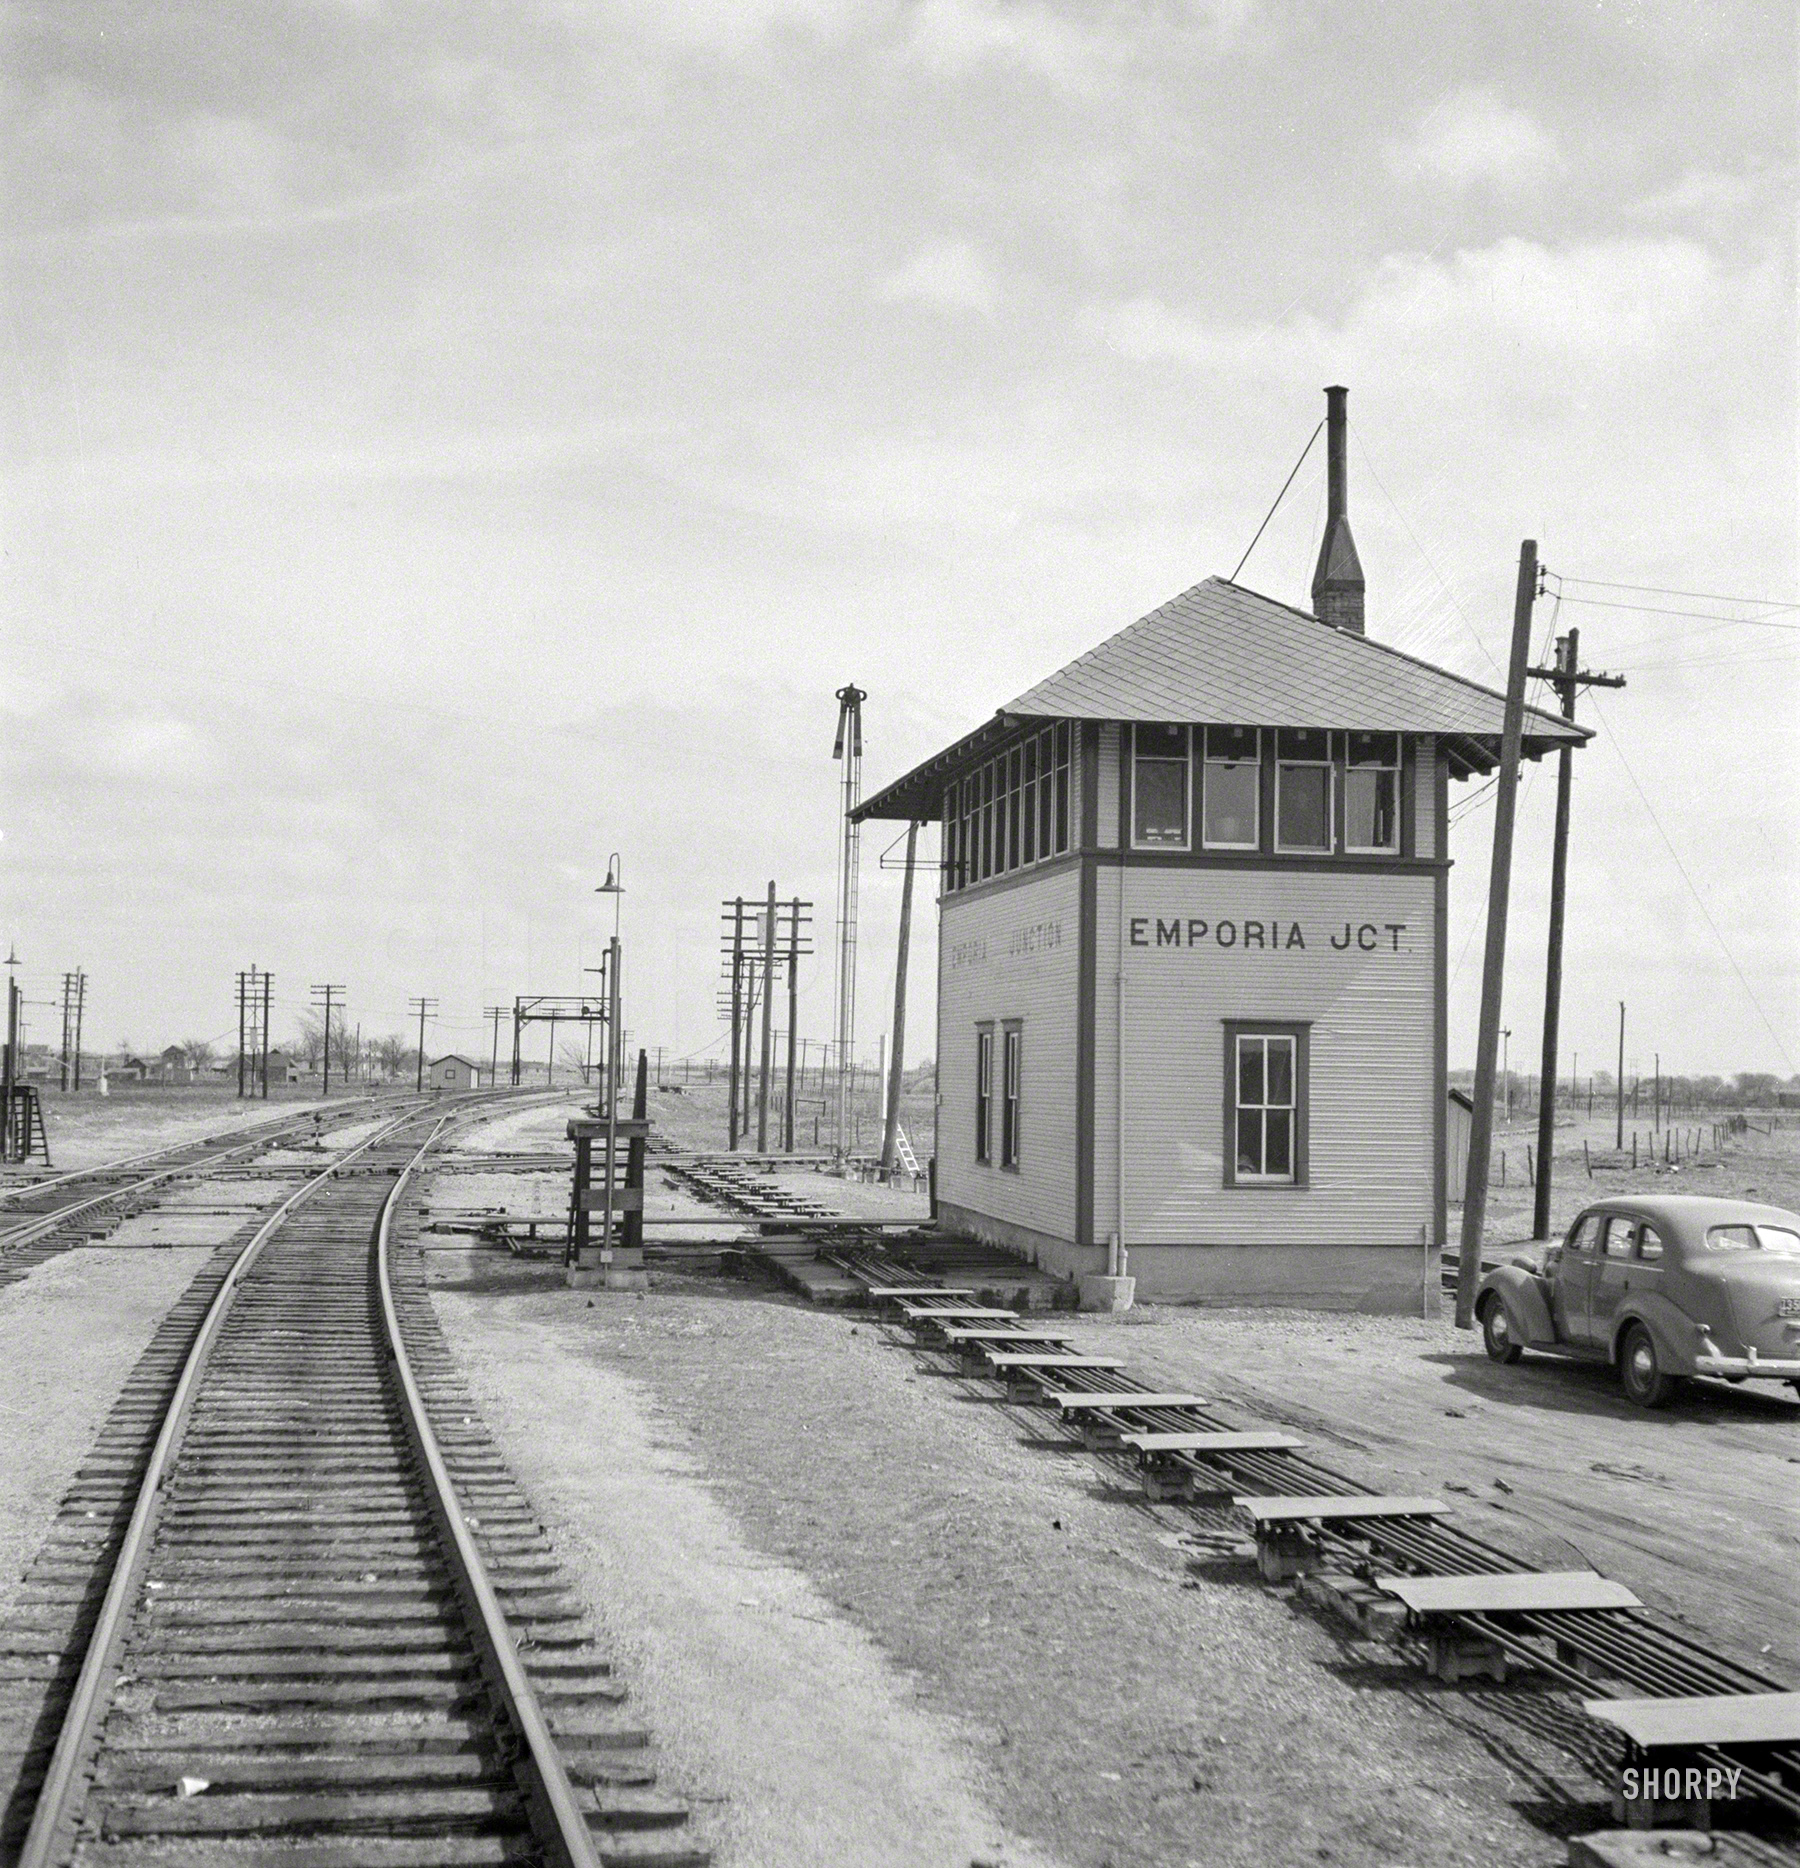 March 1943. "Emporia, Kansas. Passing Emporia Junction switch tower as the Atchison, Topeka & Santa Fe train pulls into the yard." Medium-format negative by Jack Delano for the Office of War Information. View full size.